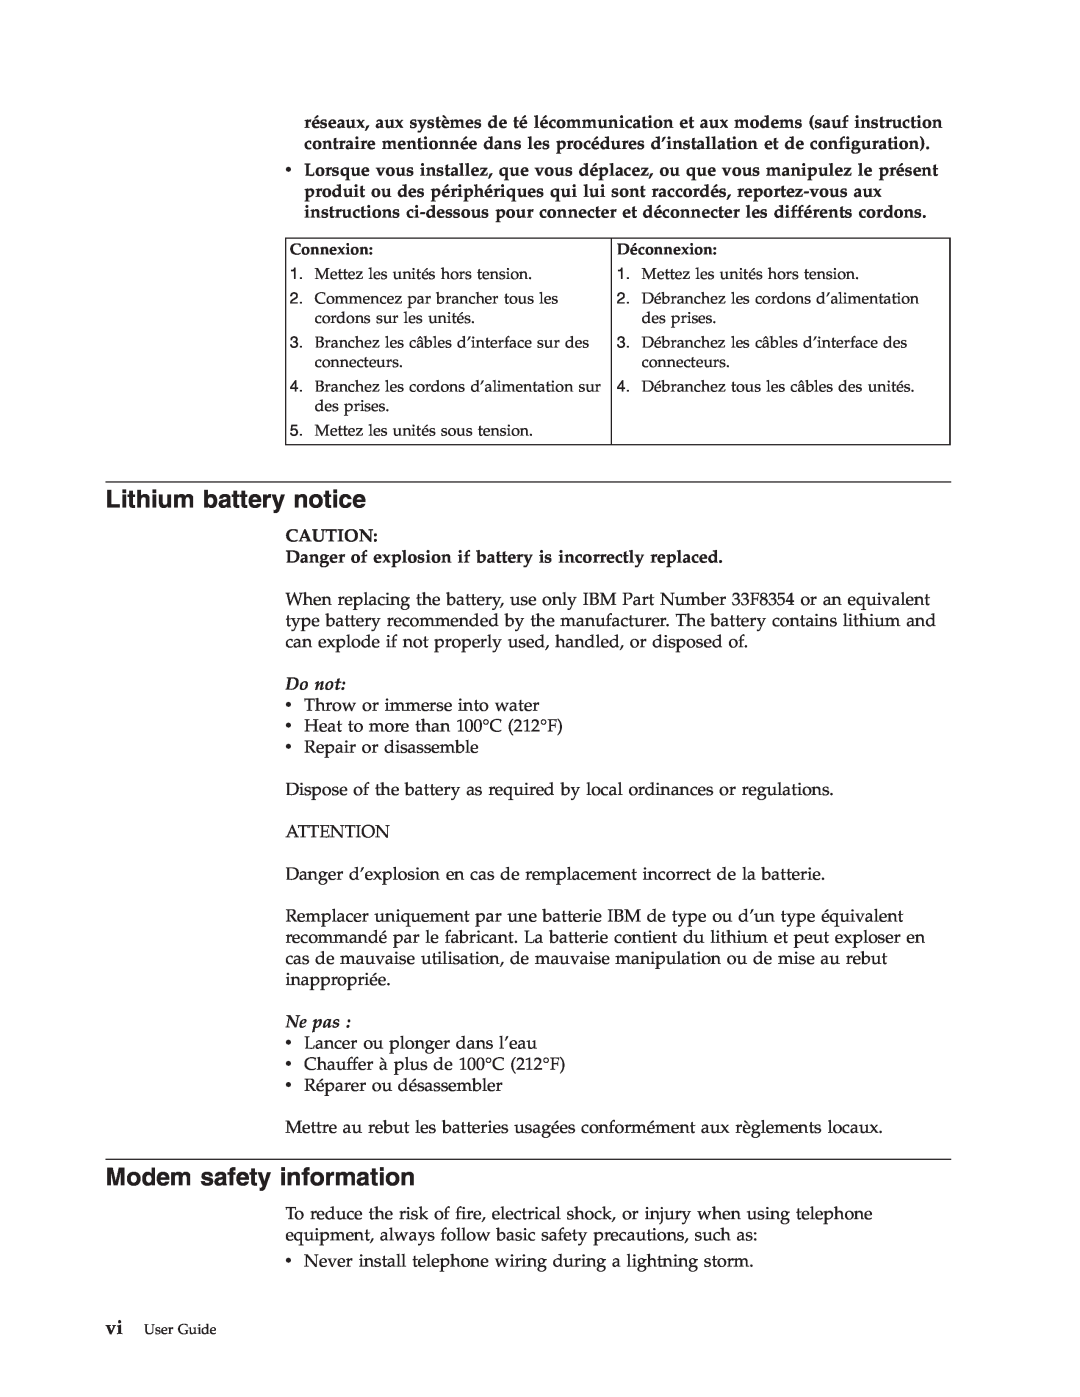 IBM 6824 Lithium battery notice, Modem safety information, Danger of explosion if battery is incorrectly replaced, Do not 